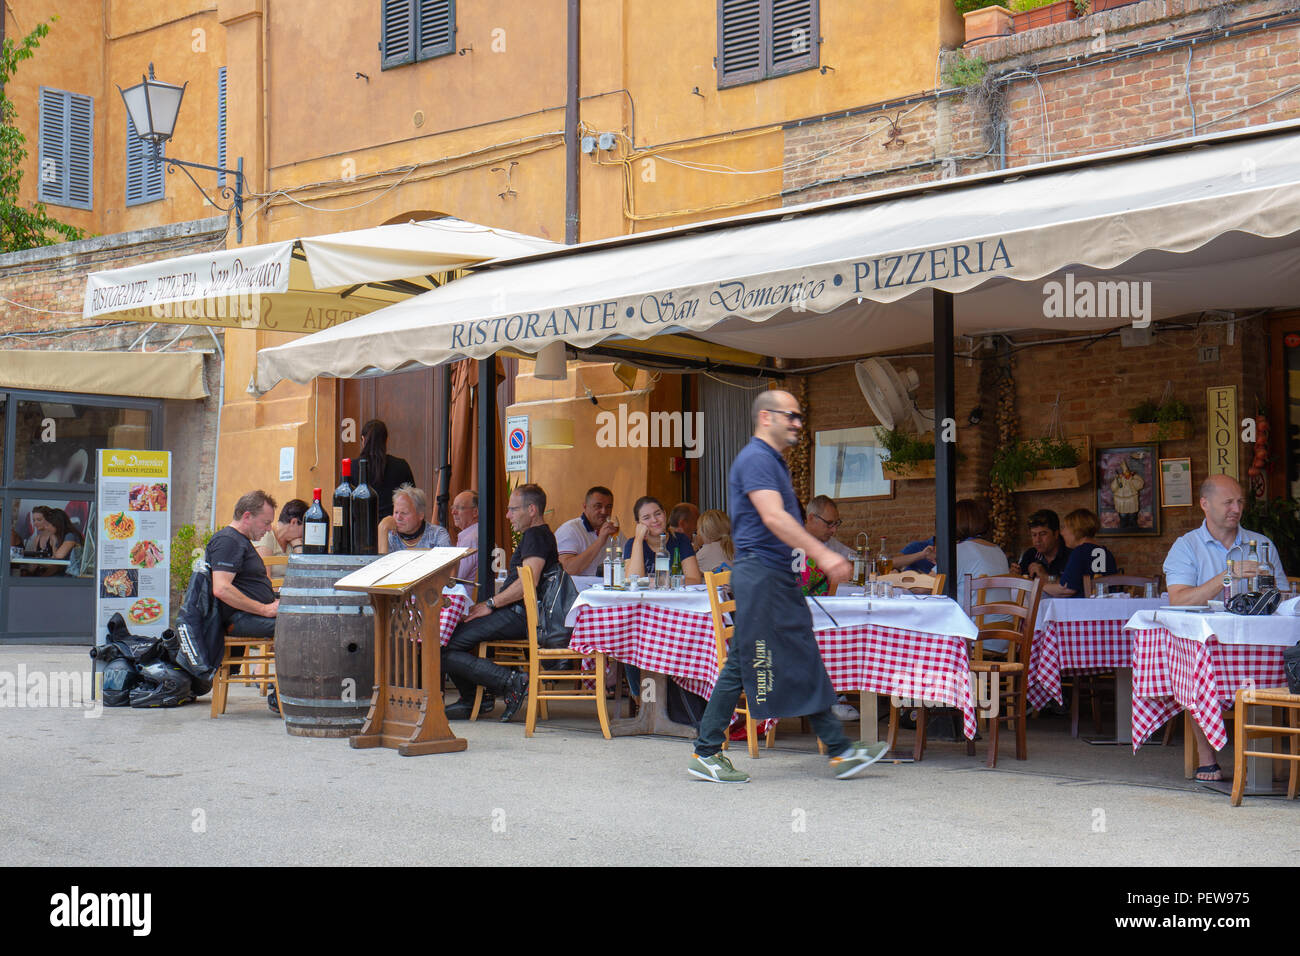 People are dining on the terrace of Restaurant 'San Domenico' in Siena, Tuscany, Italy Stock Photo